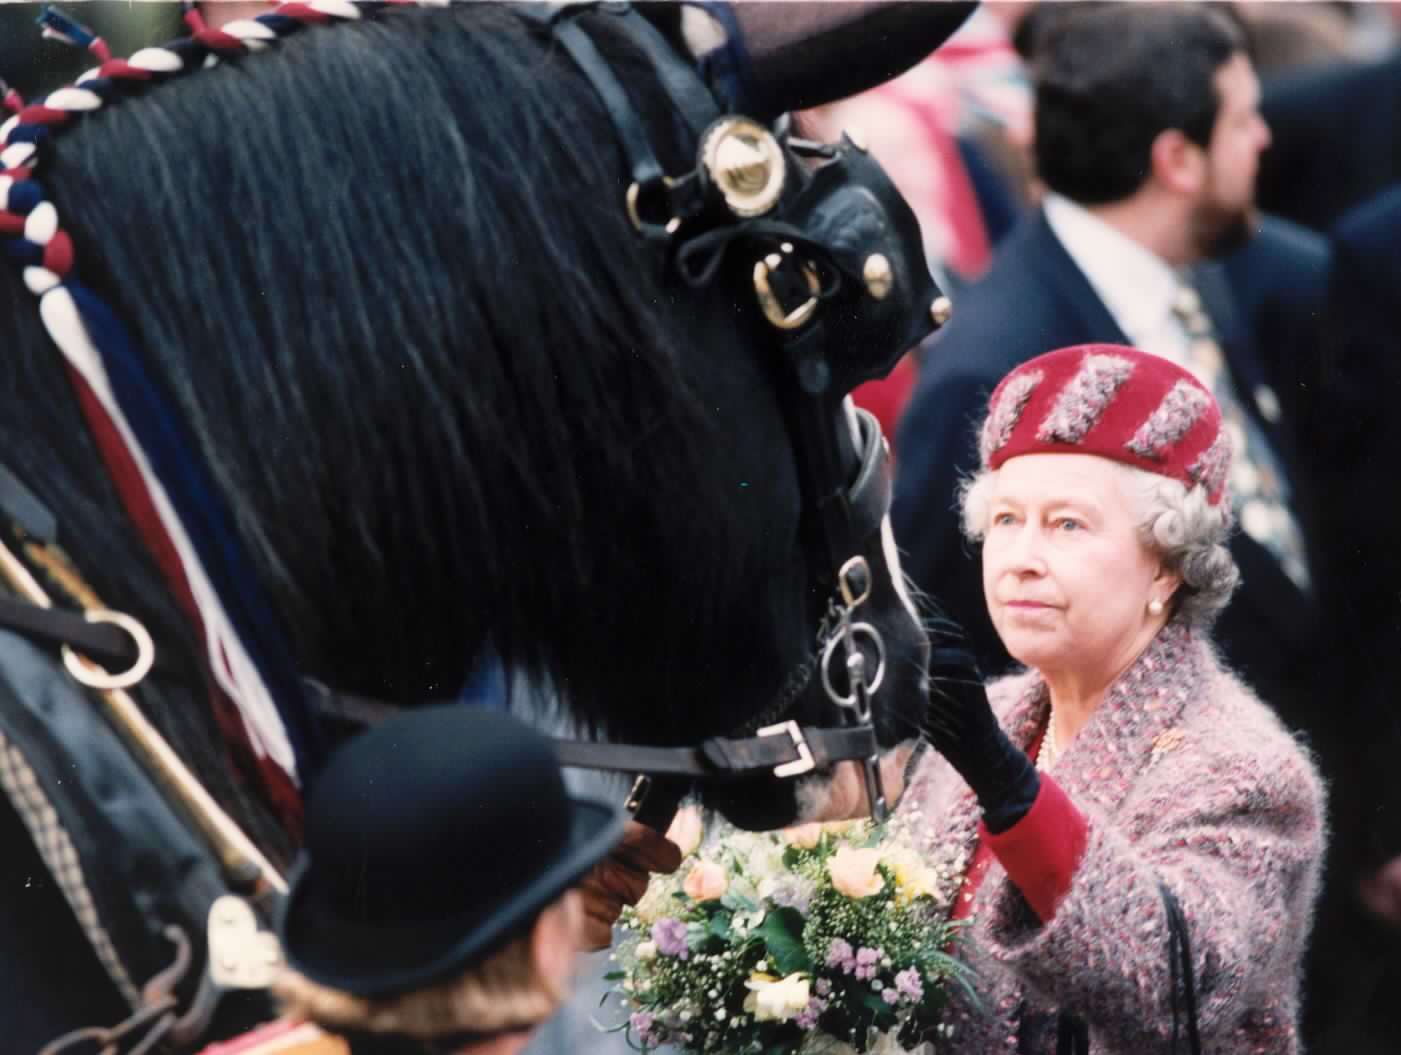 The Queen meets Bosan one of the dockyard horses on her visit to Chatham Dockyard in 1994